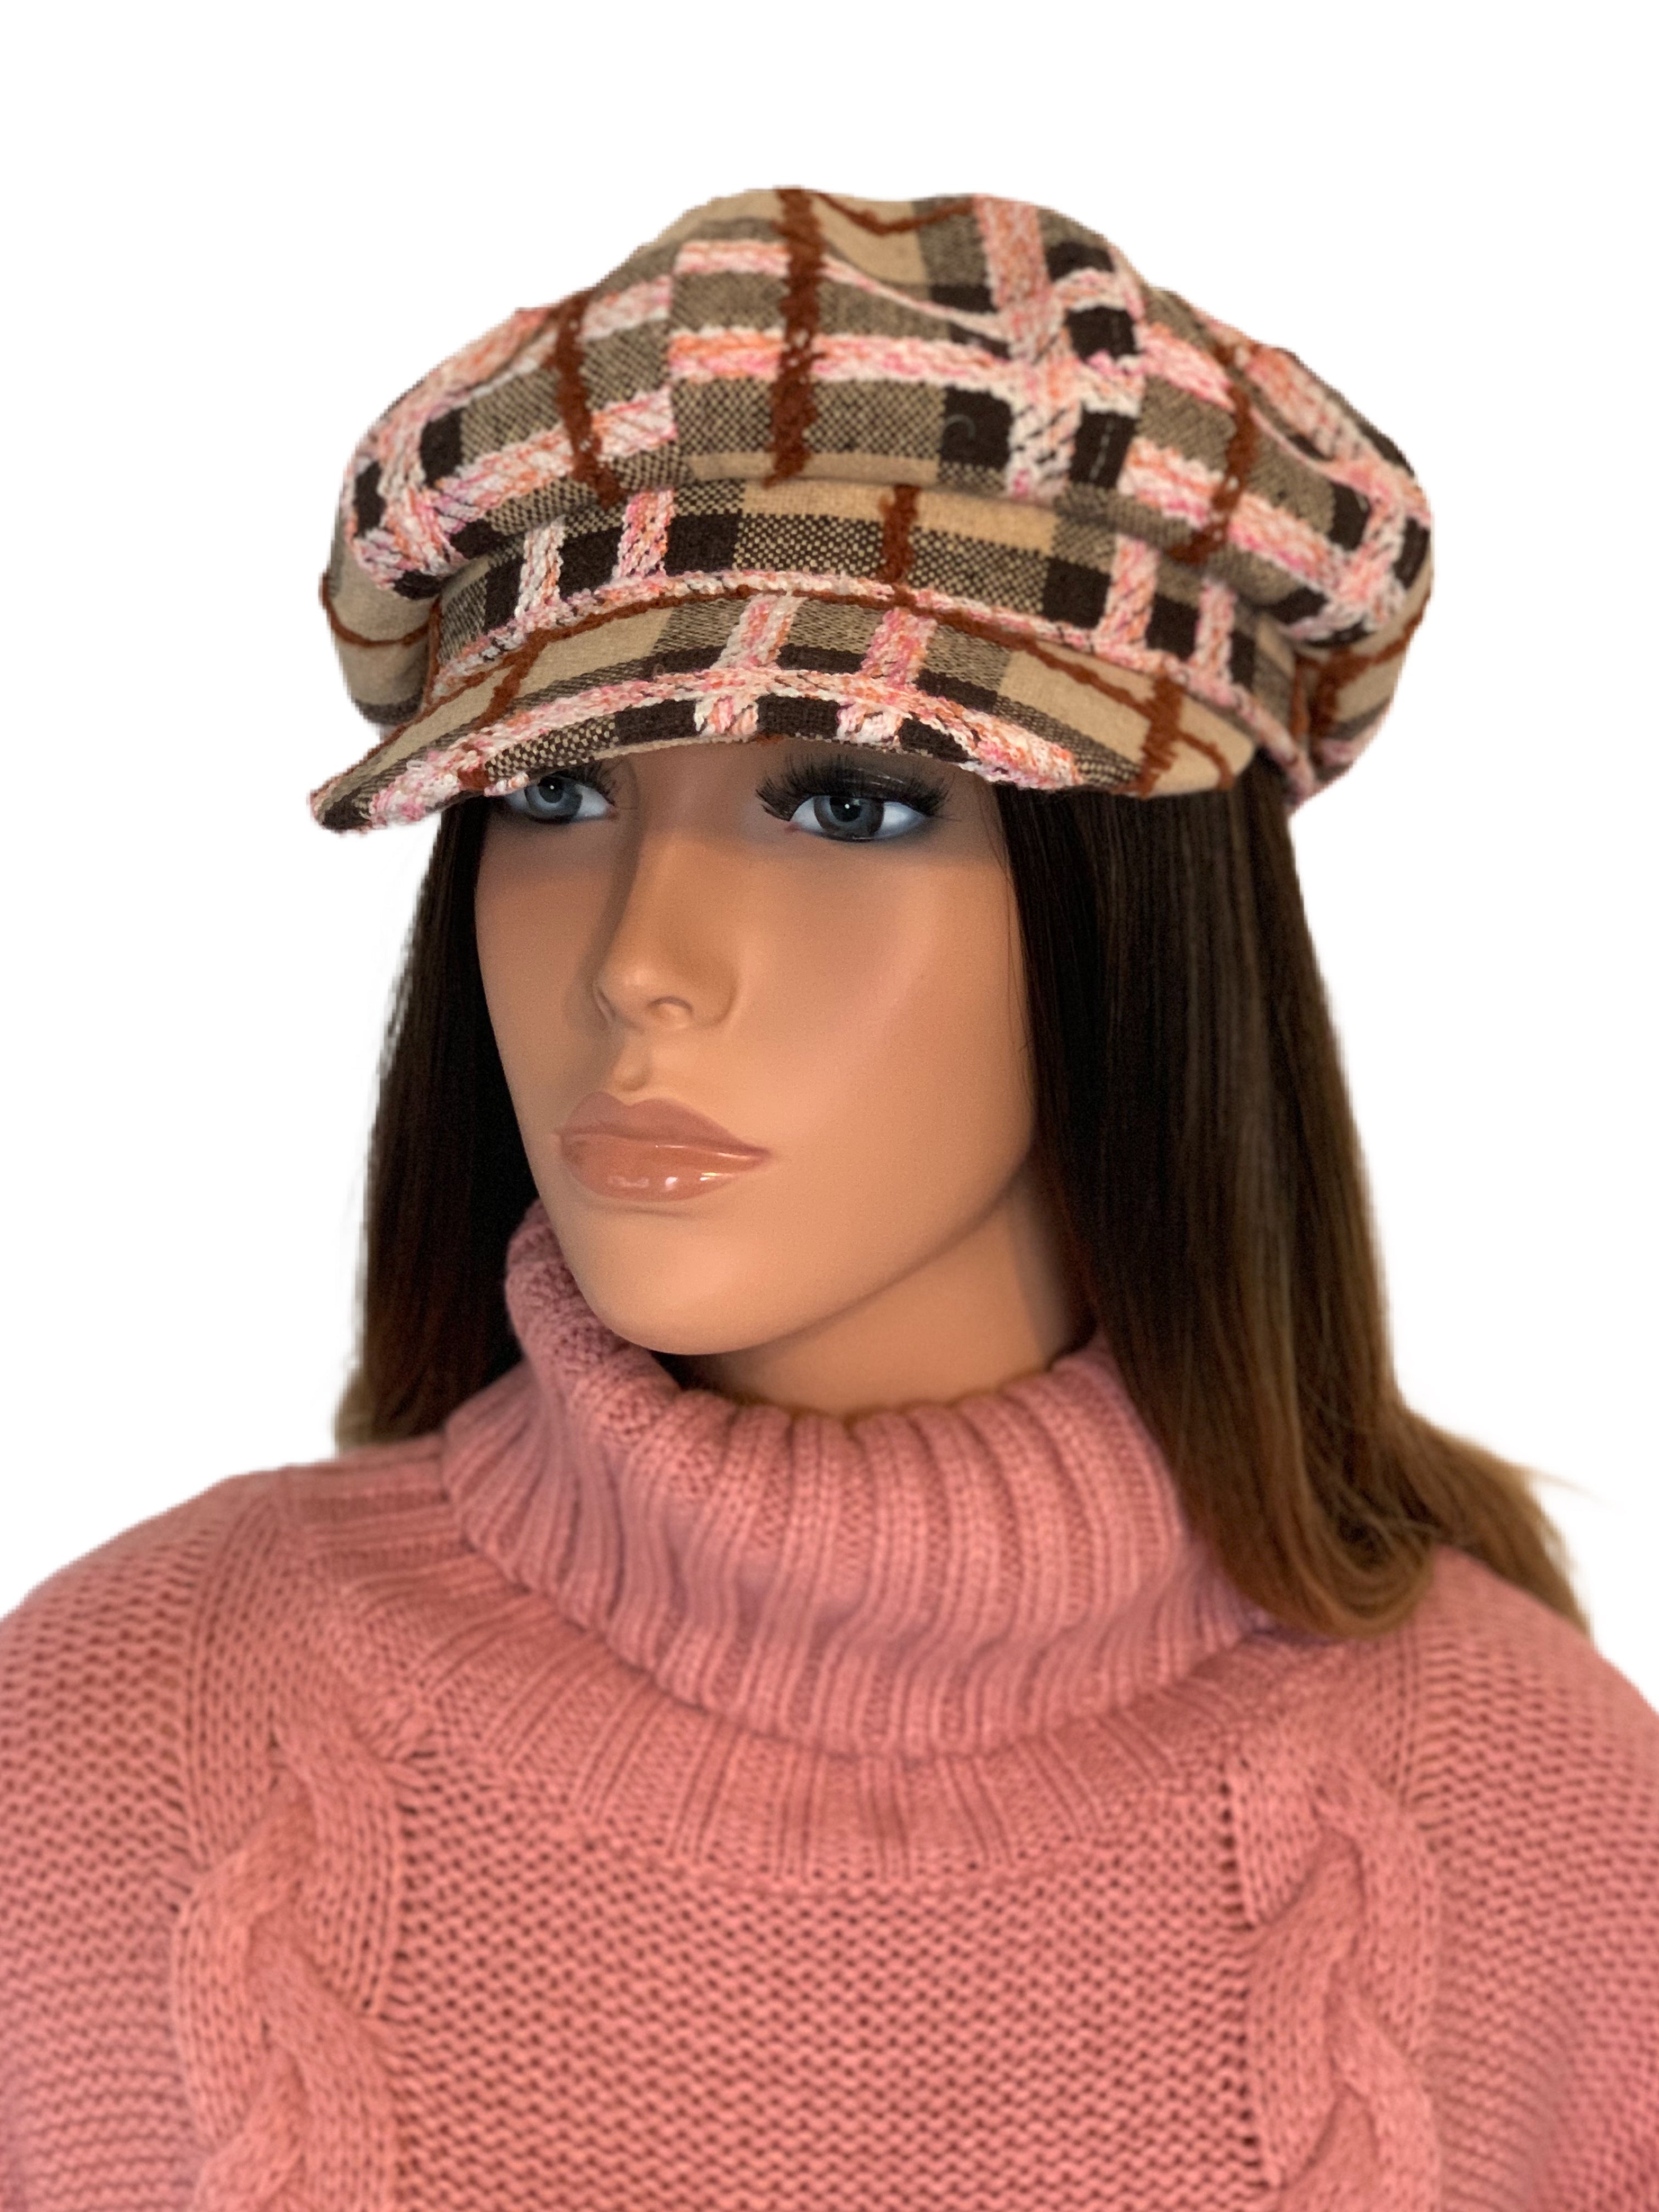 Pink, brown and tan plaid tweed hat. Adjustable with inner brim strings. High quality hat. Beautiful colors and so trendy for fall/winter. One size. 